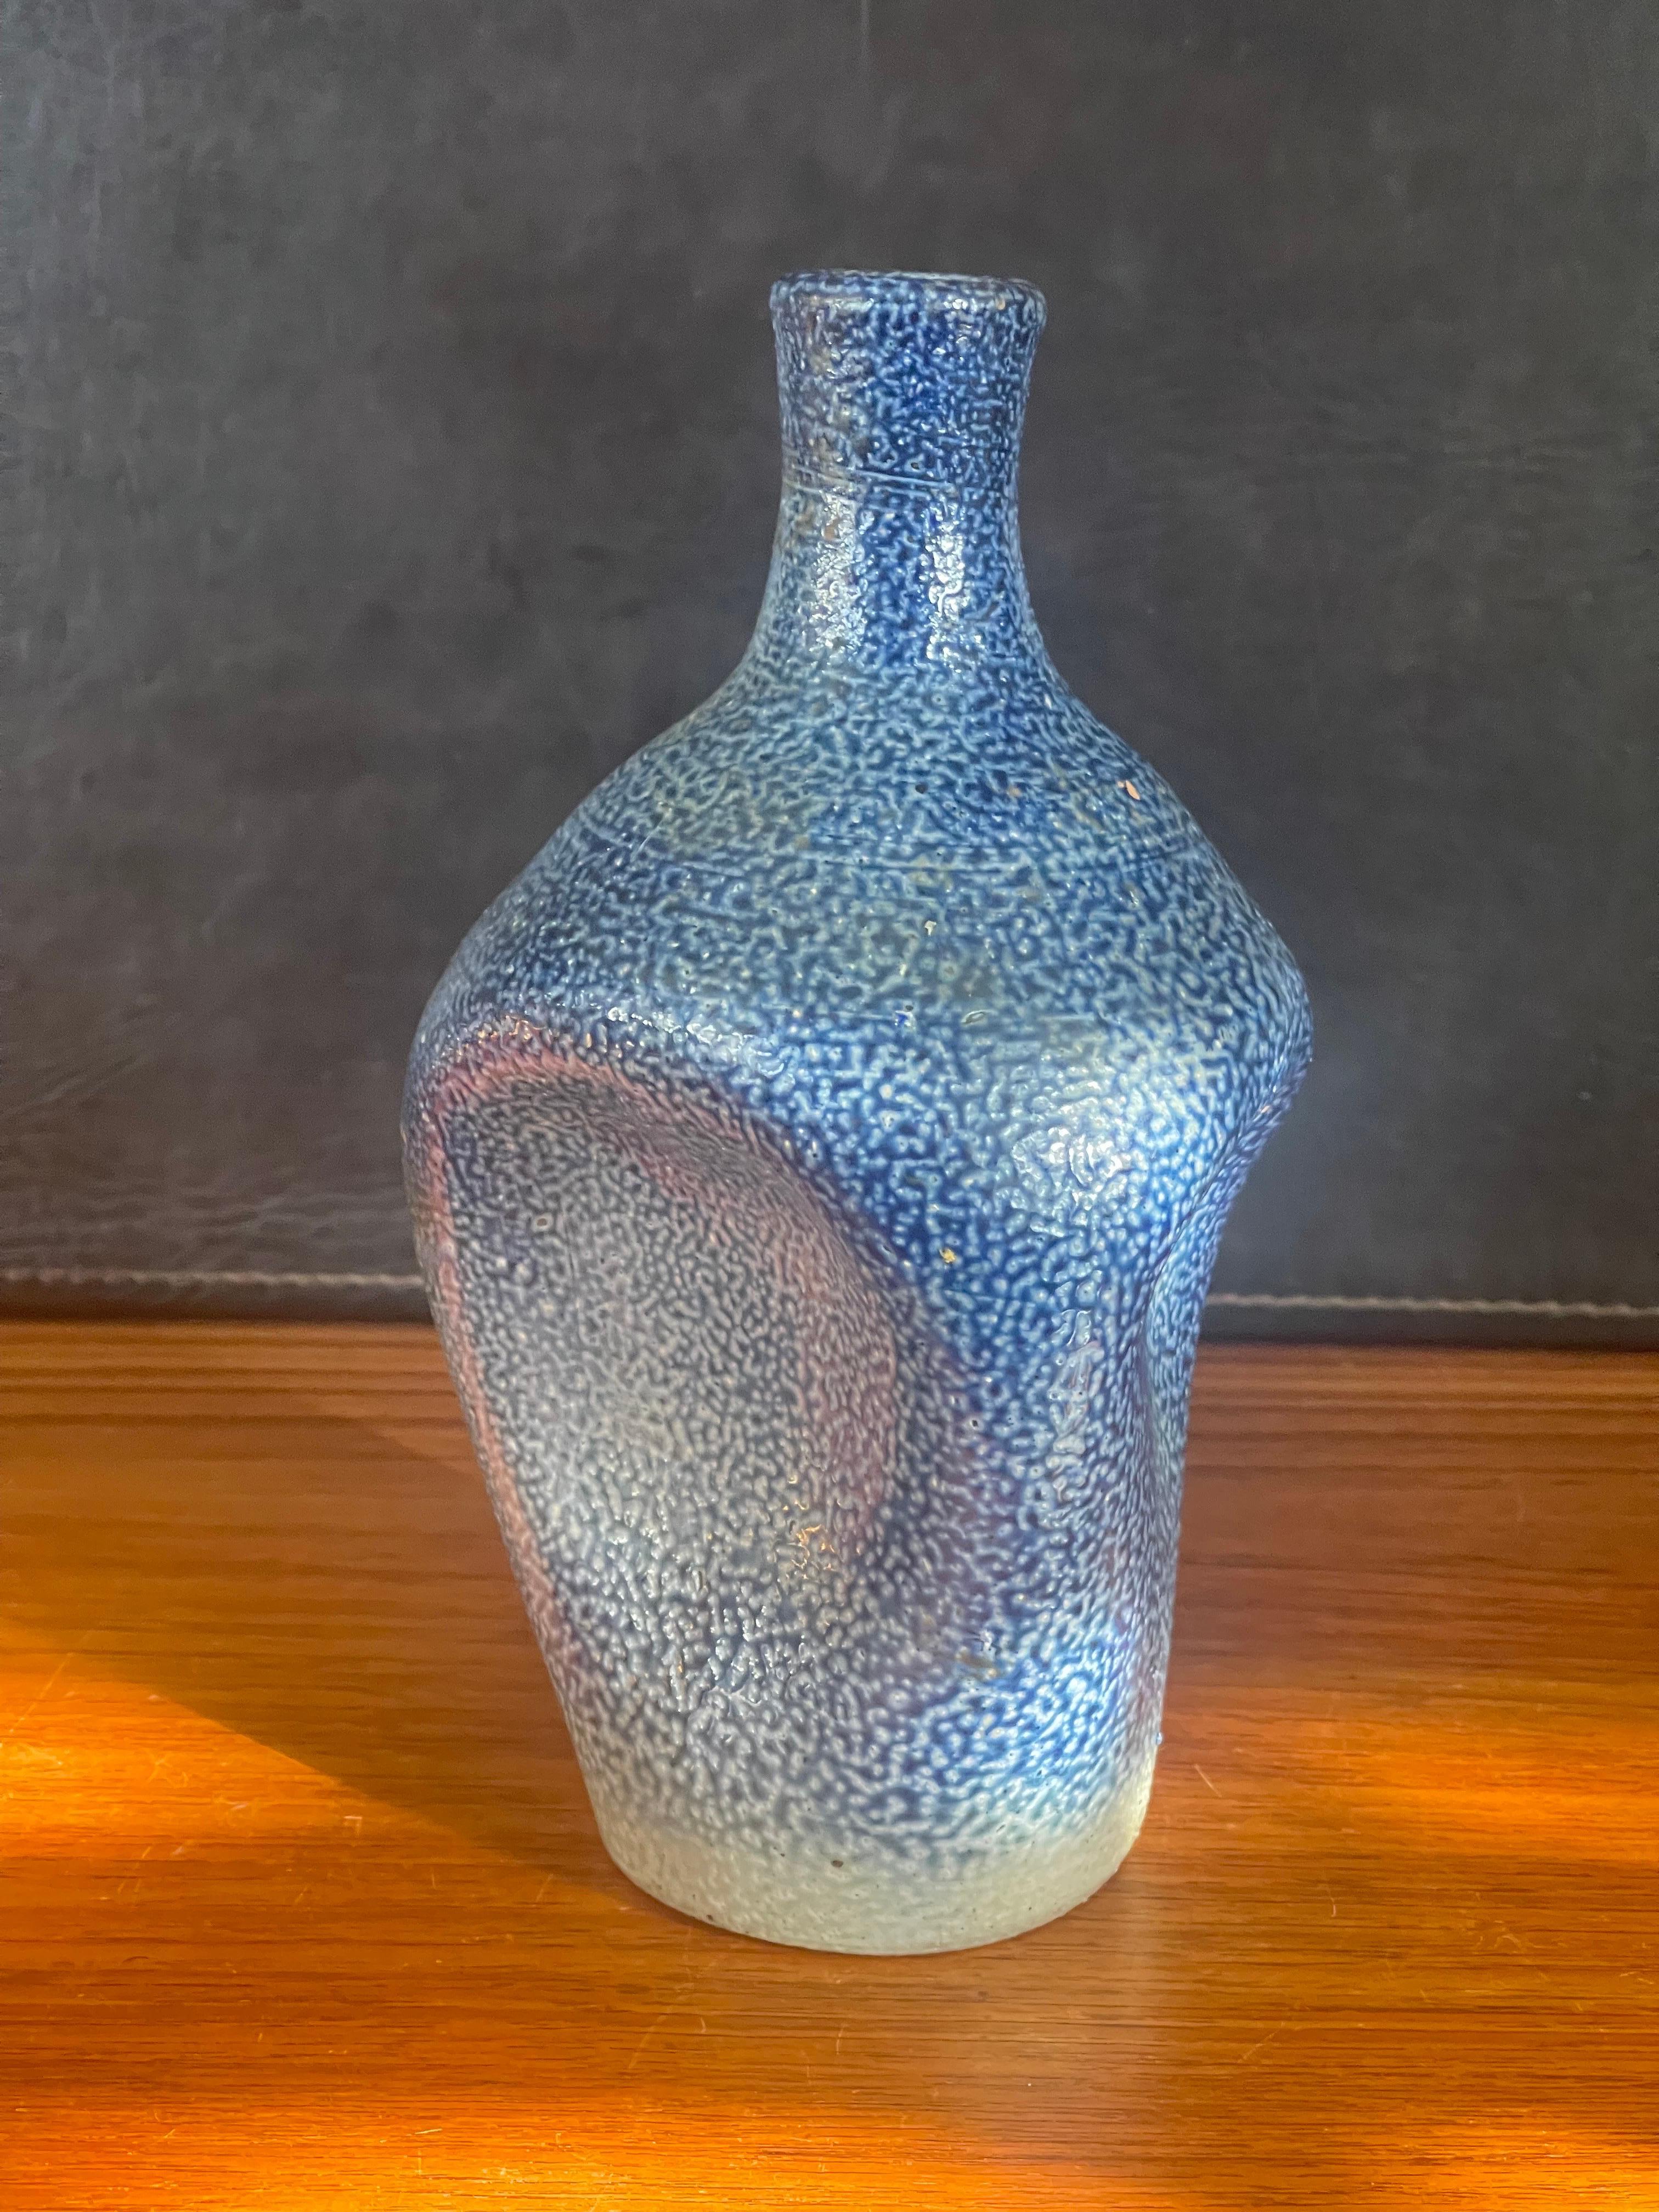 California Studio Pottery Vase with Dimpled Sides For Sale 2